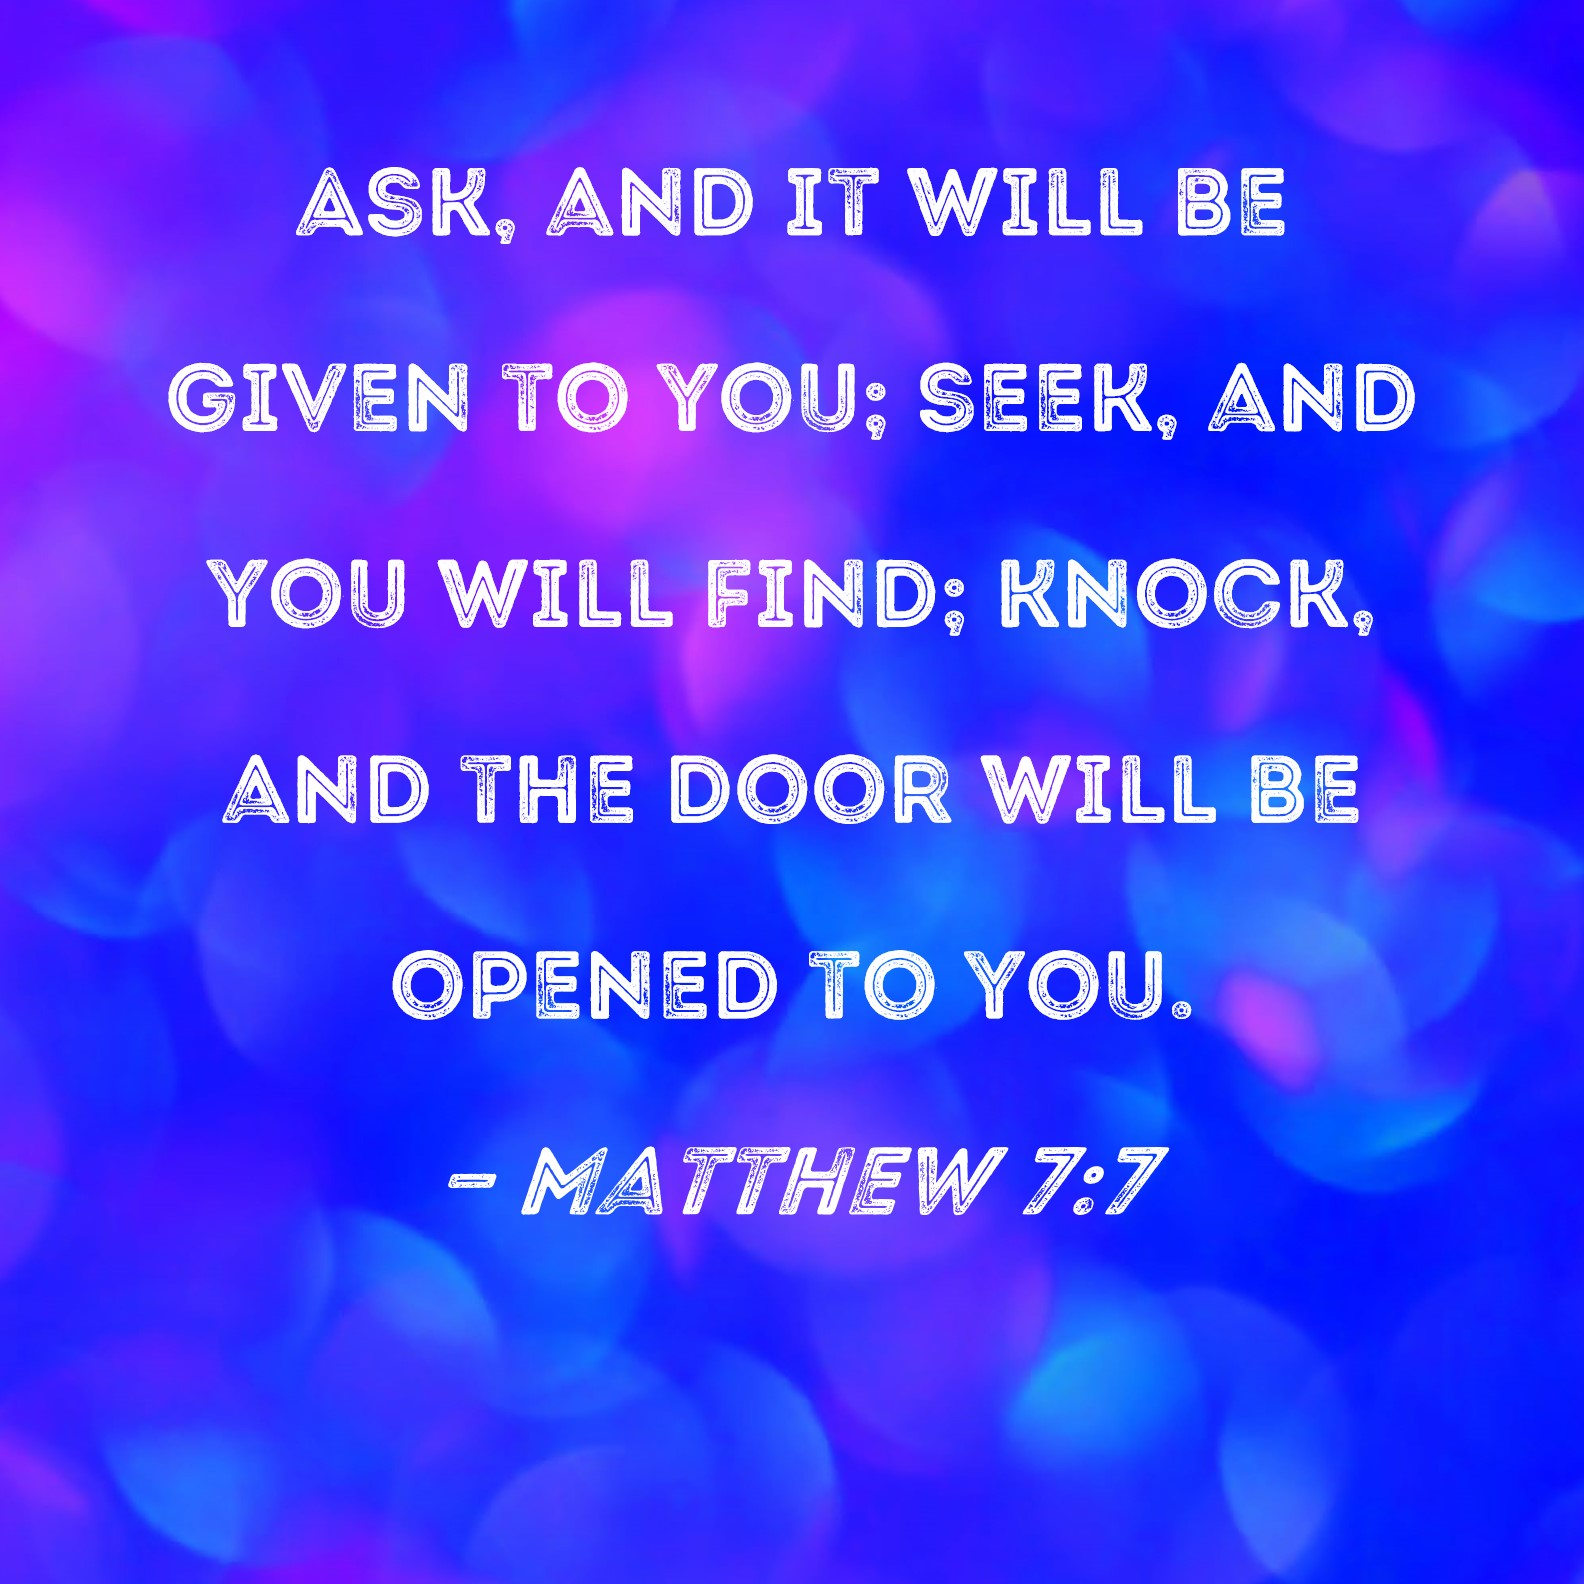 matthew-7-7-ask-and-it-will-be-given-to-you-seek-and-you-will-find